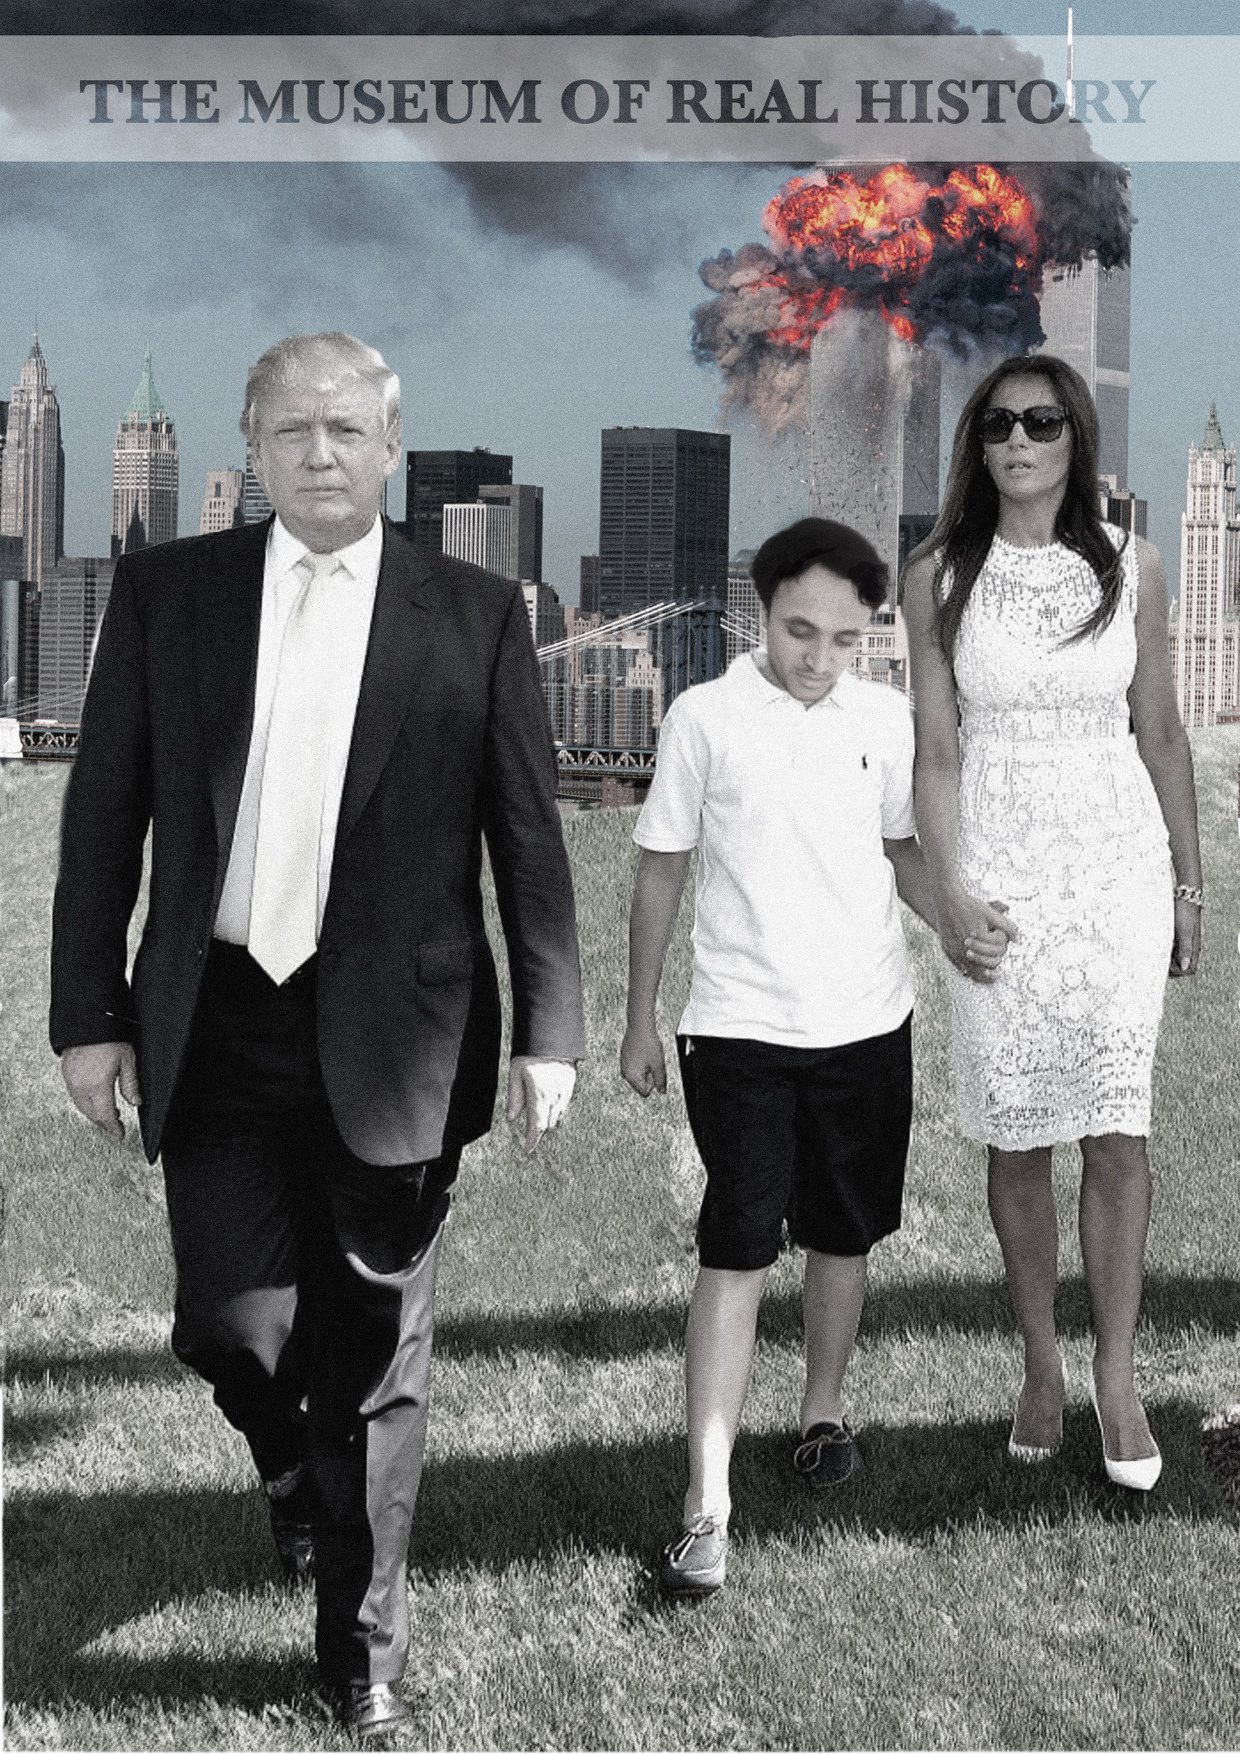 Melania Trump holding AJ's hand, twin towers in the back. From the exhibition Borderline Offensive: The Museum of Real History. Photo: Melania Trump holding AJ's hand, twin towers in the back. From the exhibition Borderline Offensive: The Museum of Real History. Courtesy of Borderline Offensive. Photo.